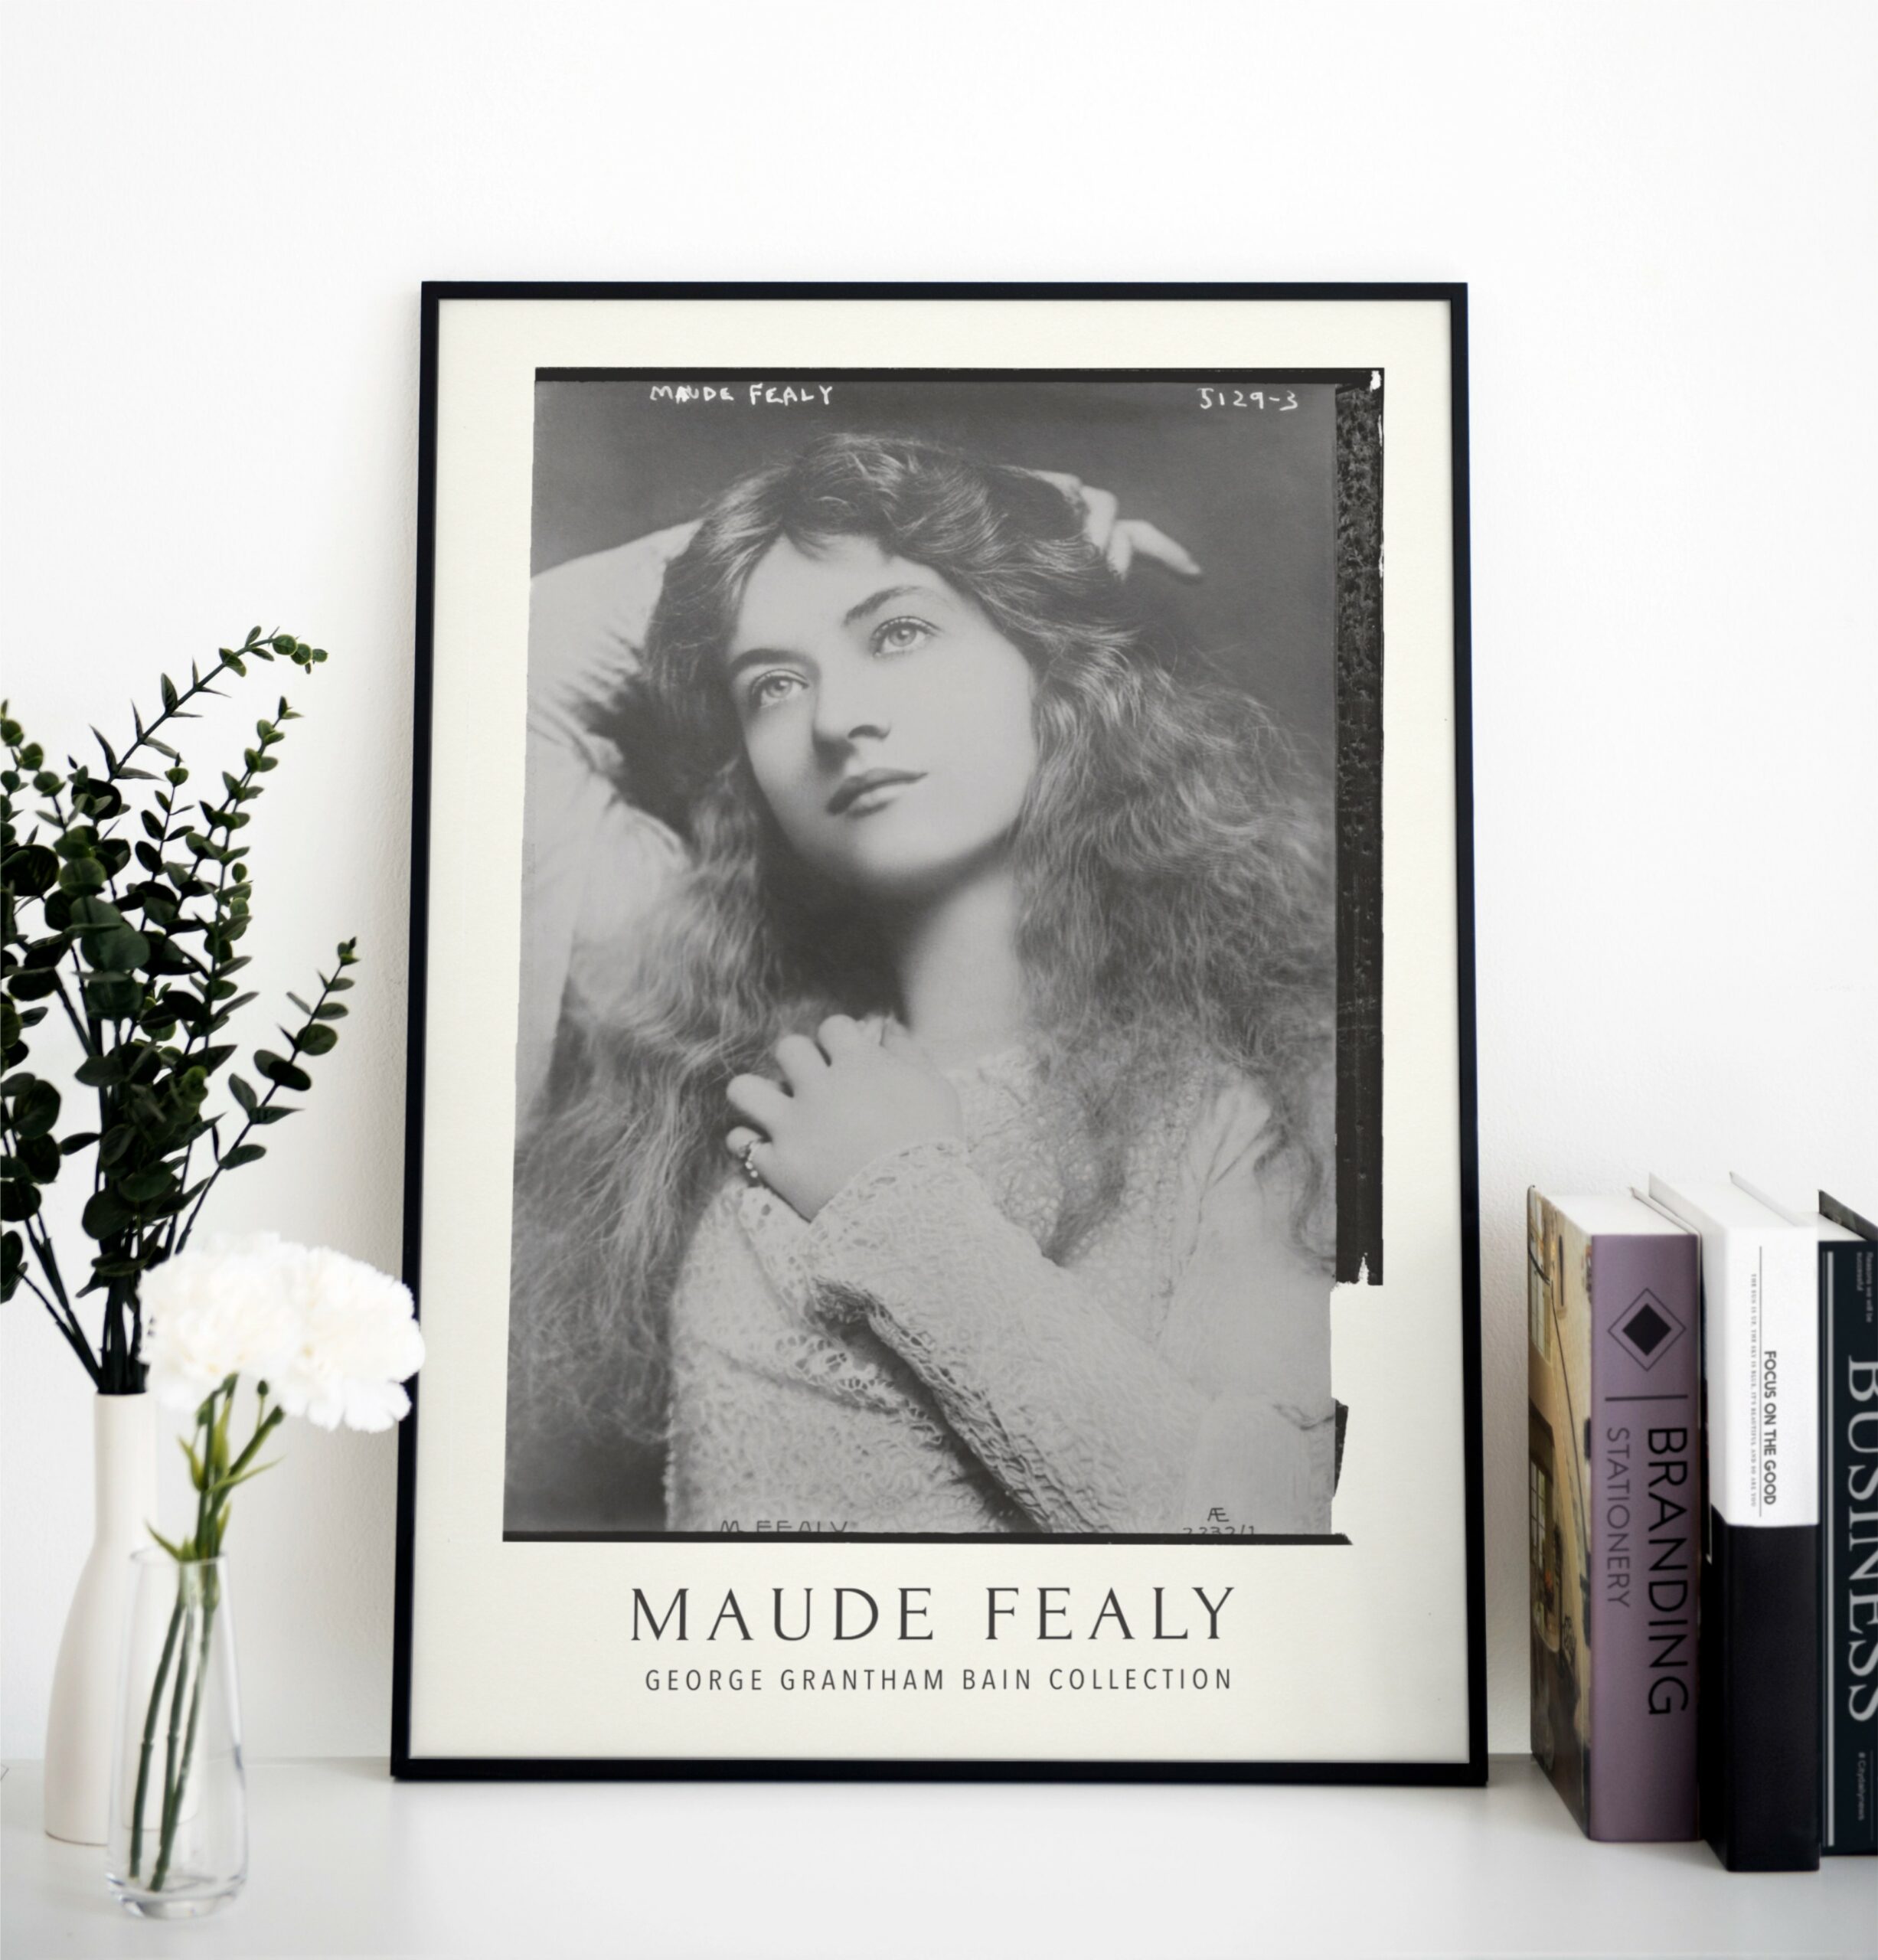 Maude Fealy Silent Film Era Poster: A tribute to the celebrated actress, known for her work in early cinema, perfect for film enthusiasts and as a classic decorative piece for any space.